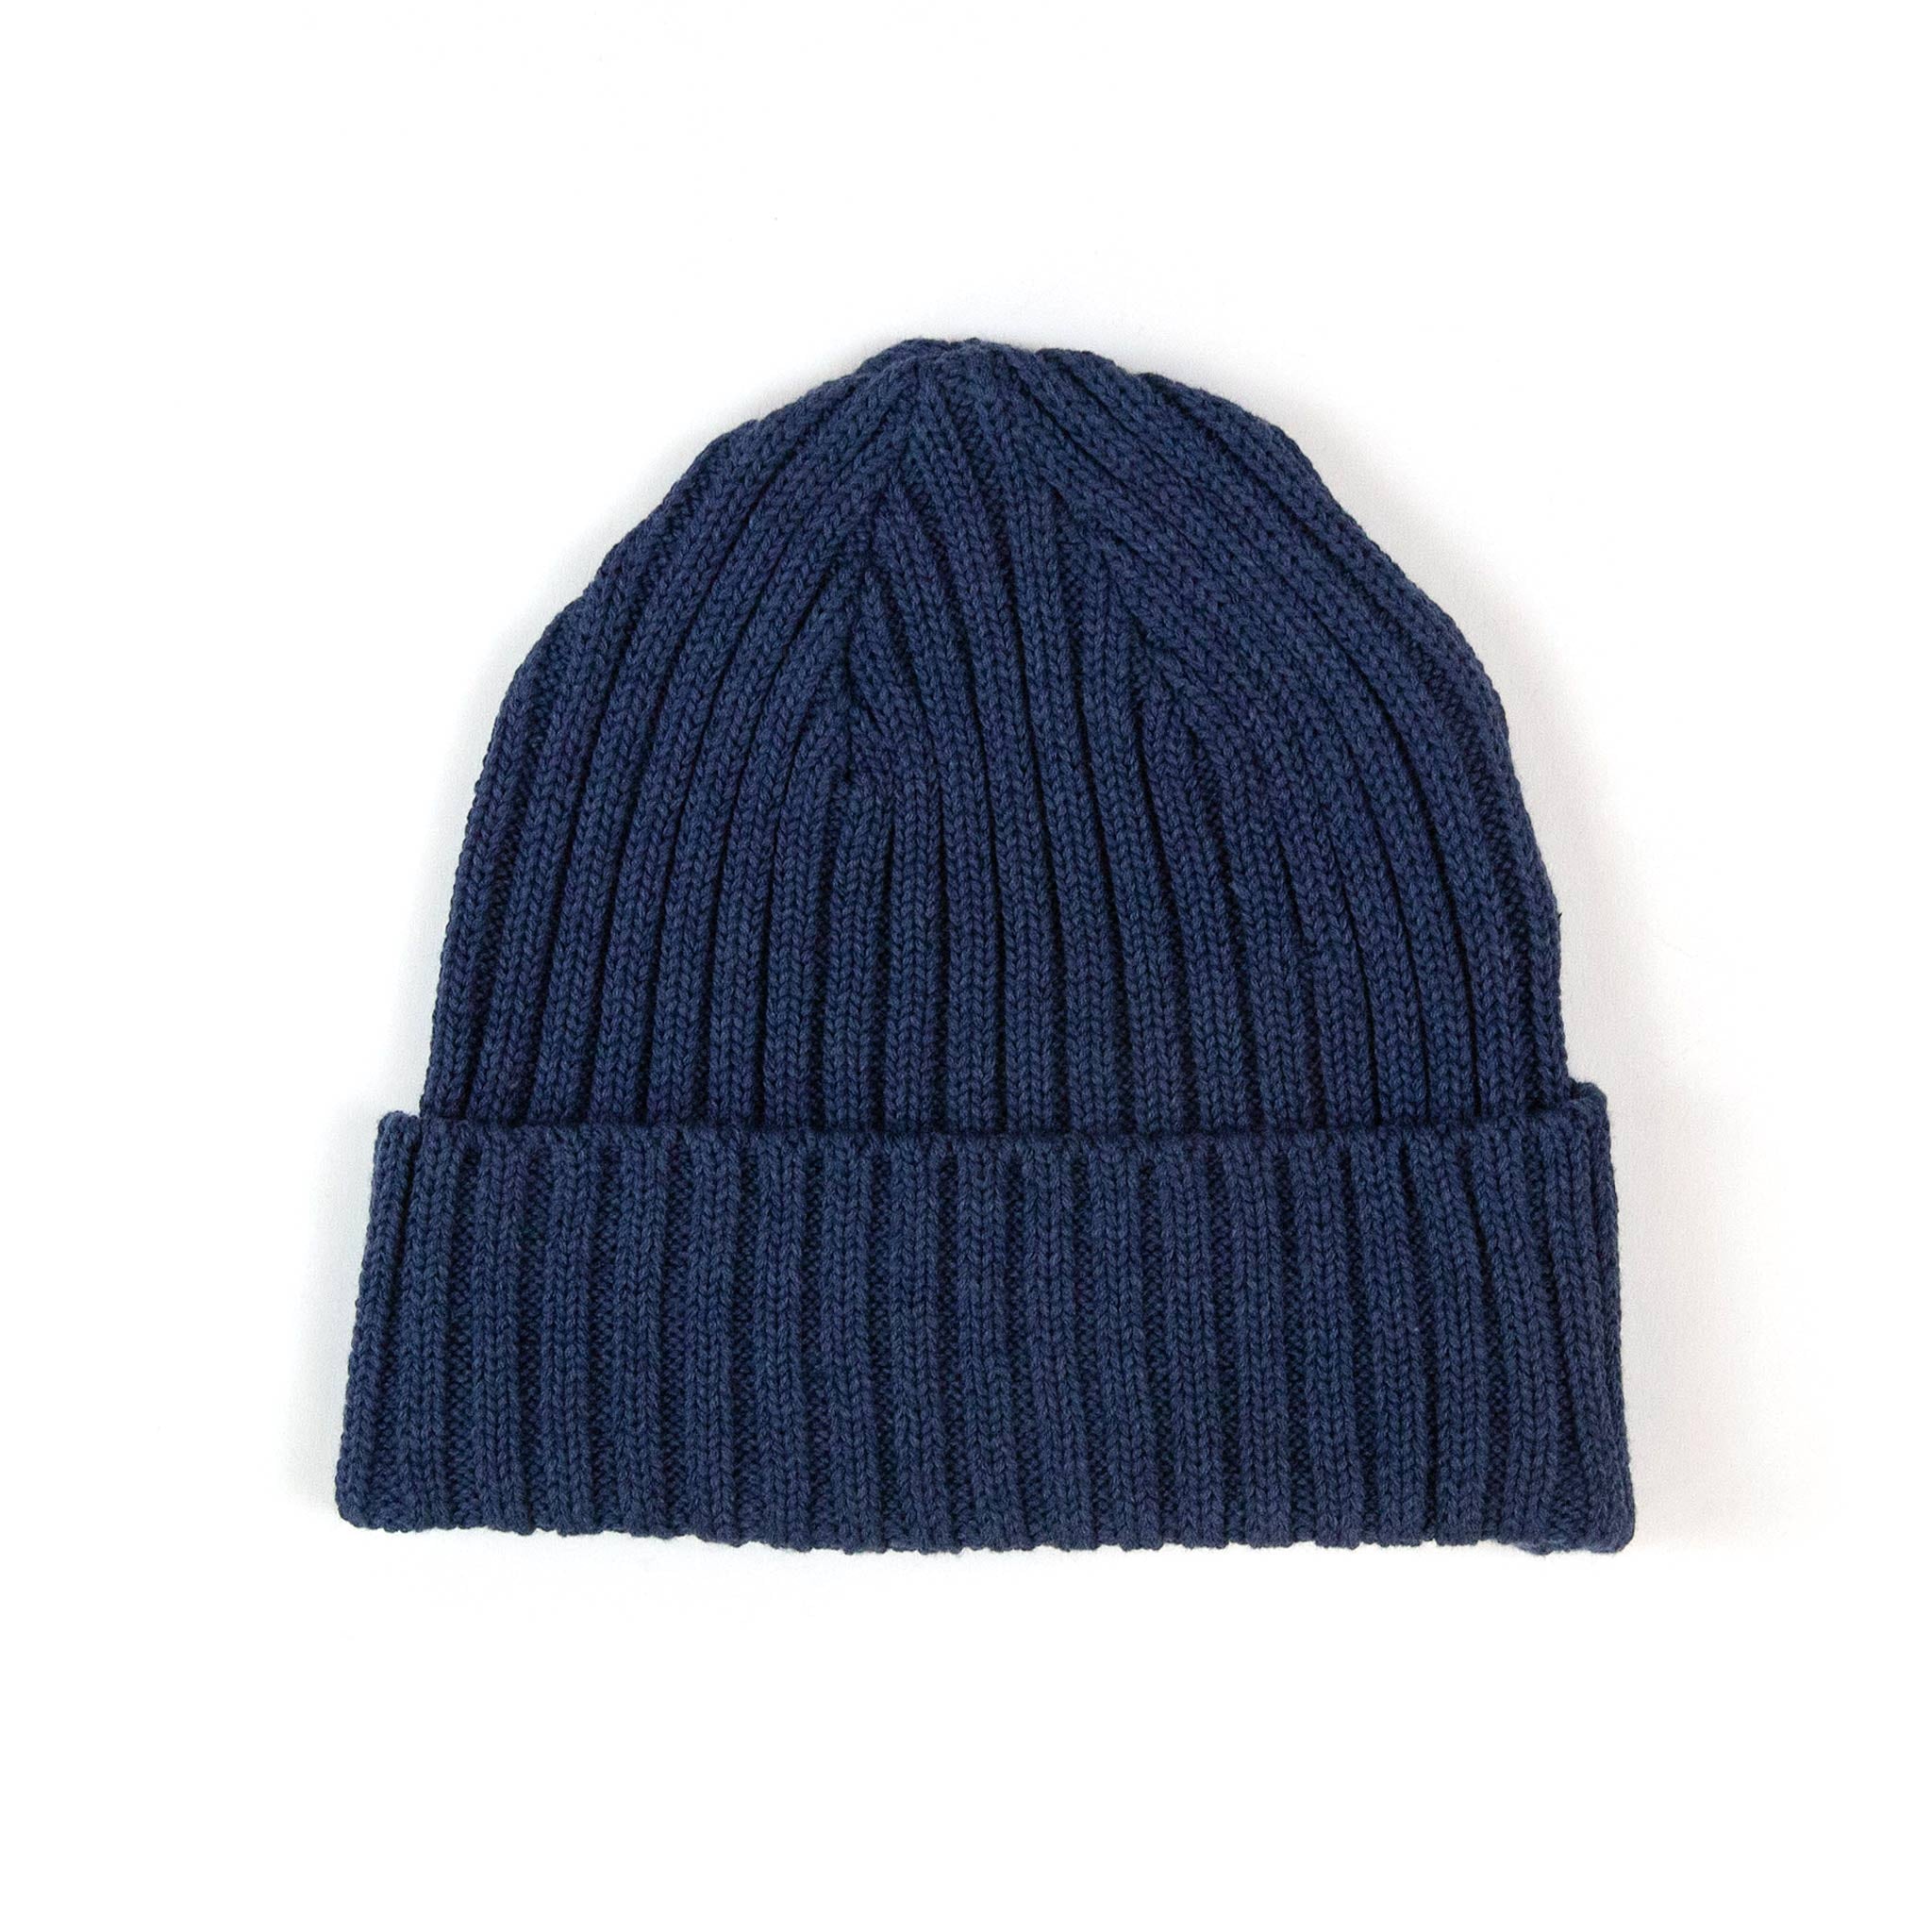 The Real McCoy's MA21014 Cotton Bronson Knit Cap Navy